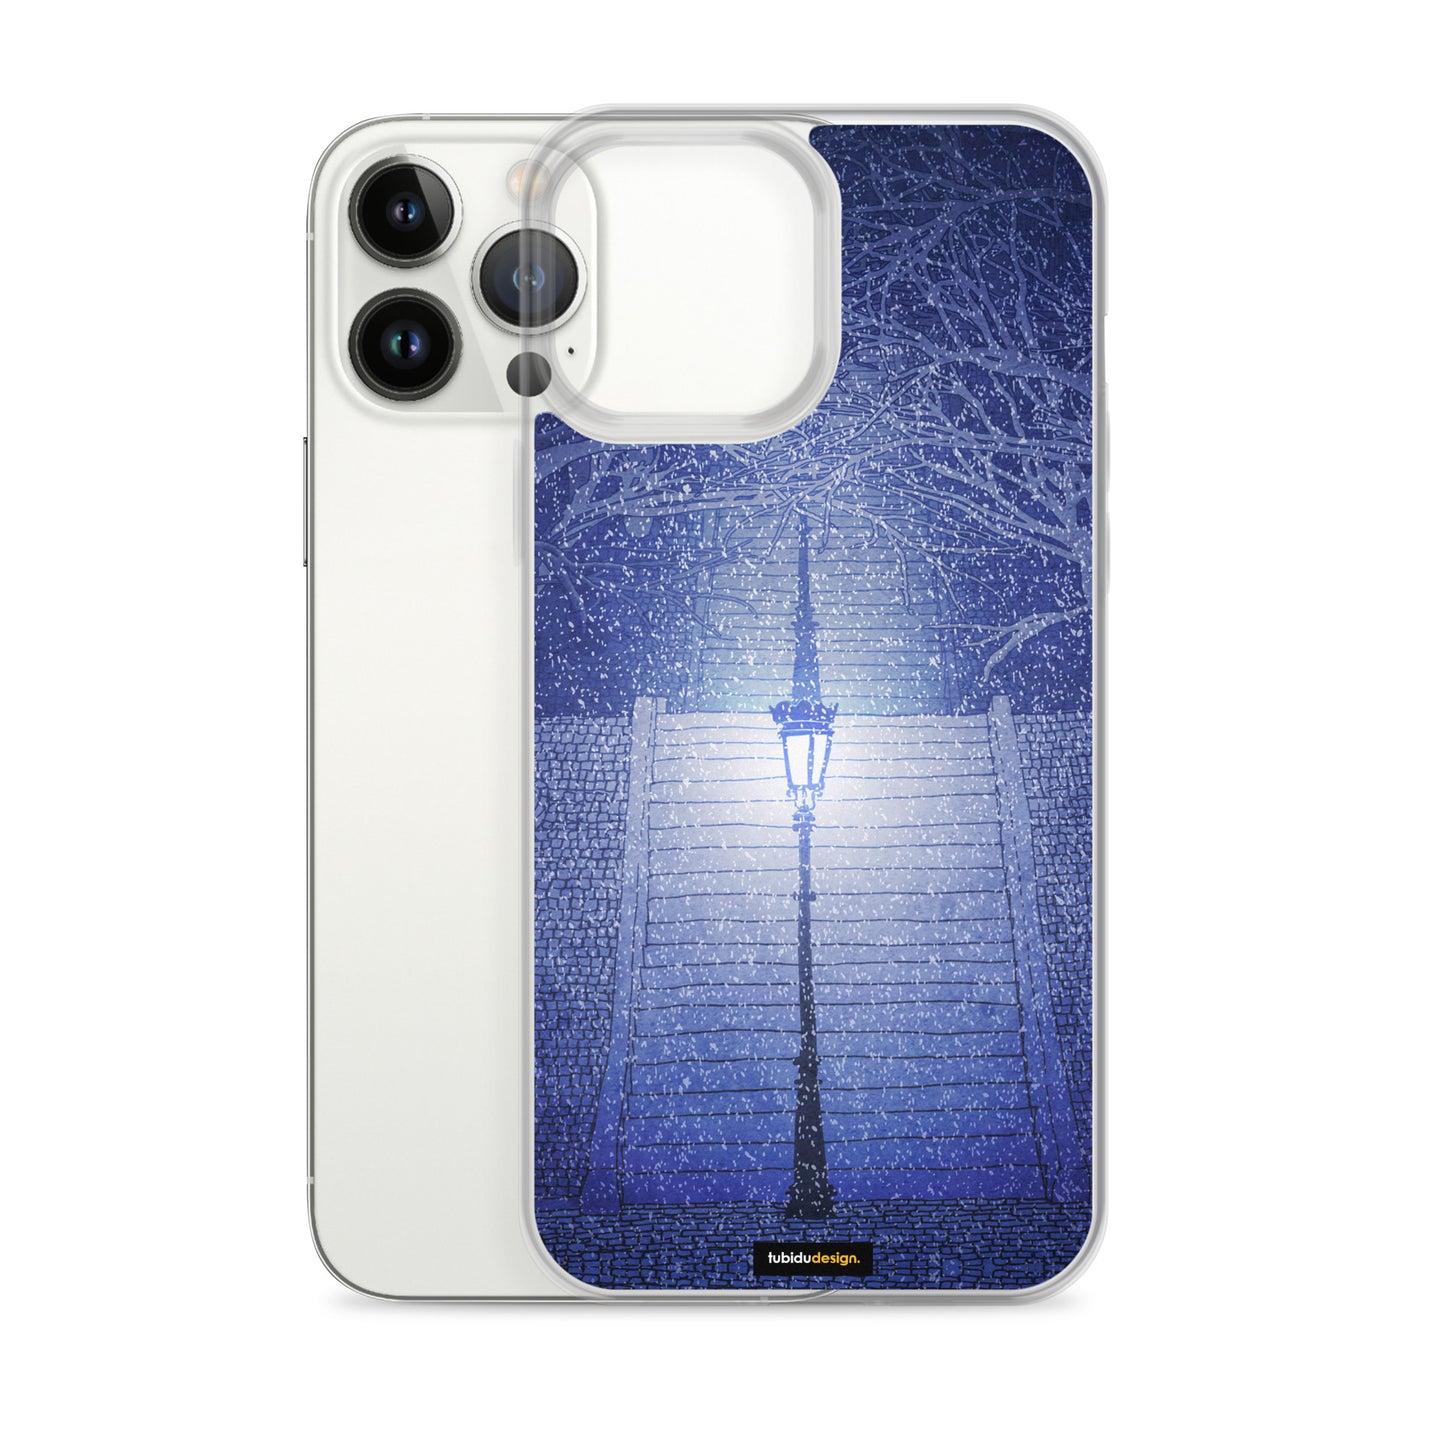 Way to the unknown - Illustrated iPhone Case